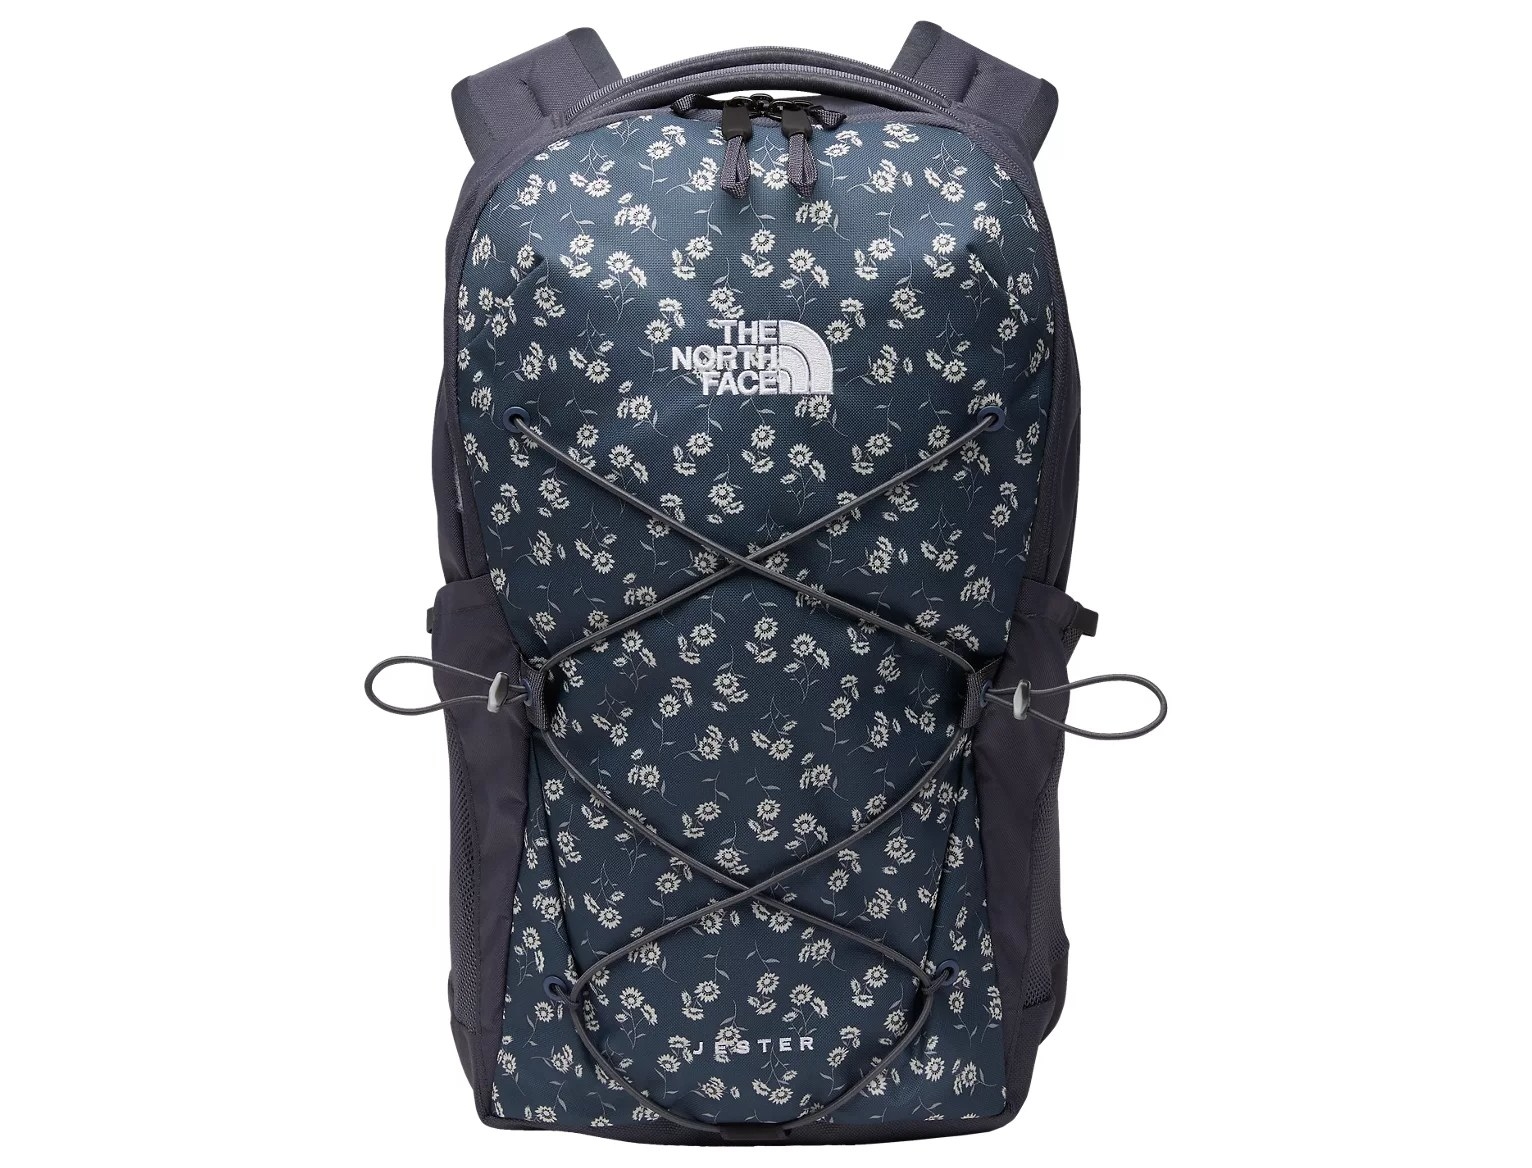 the blue floral backpack